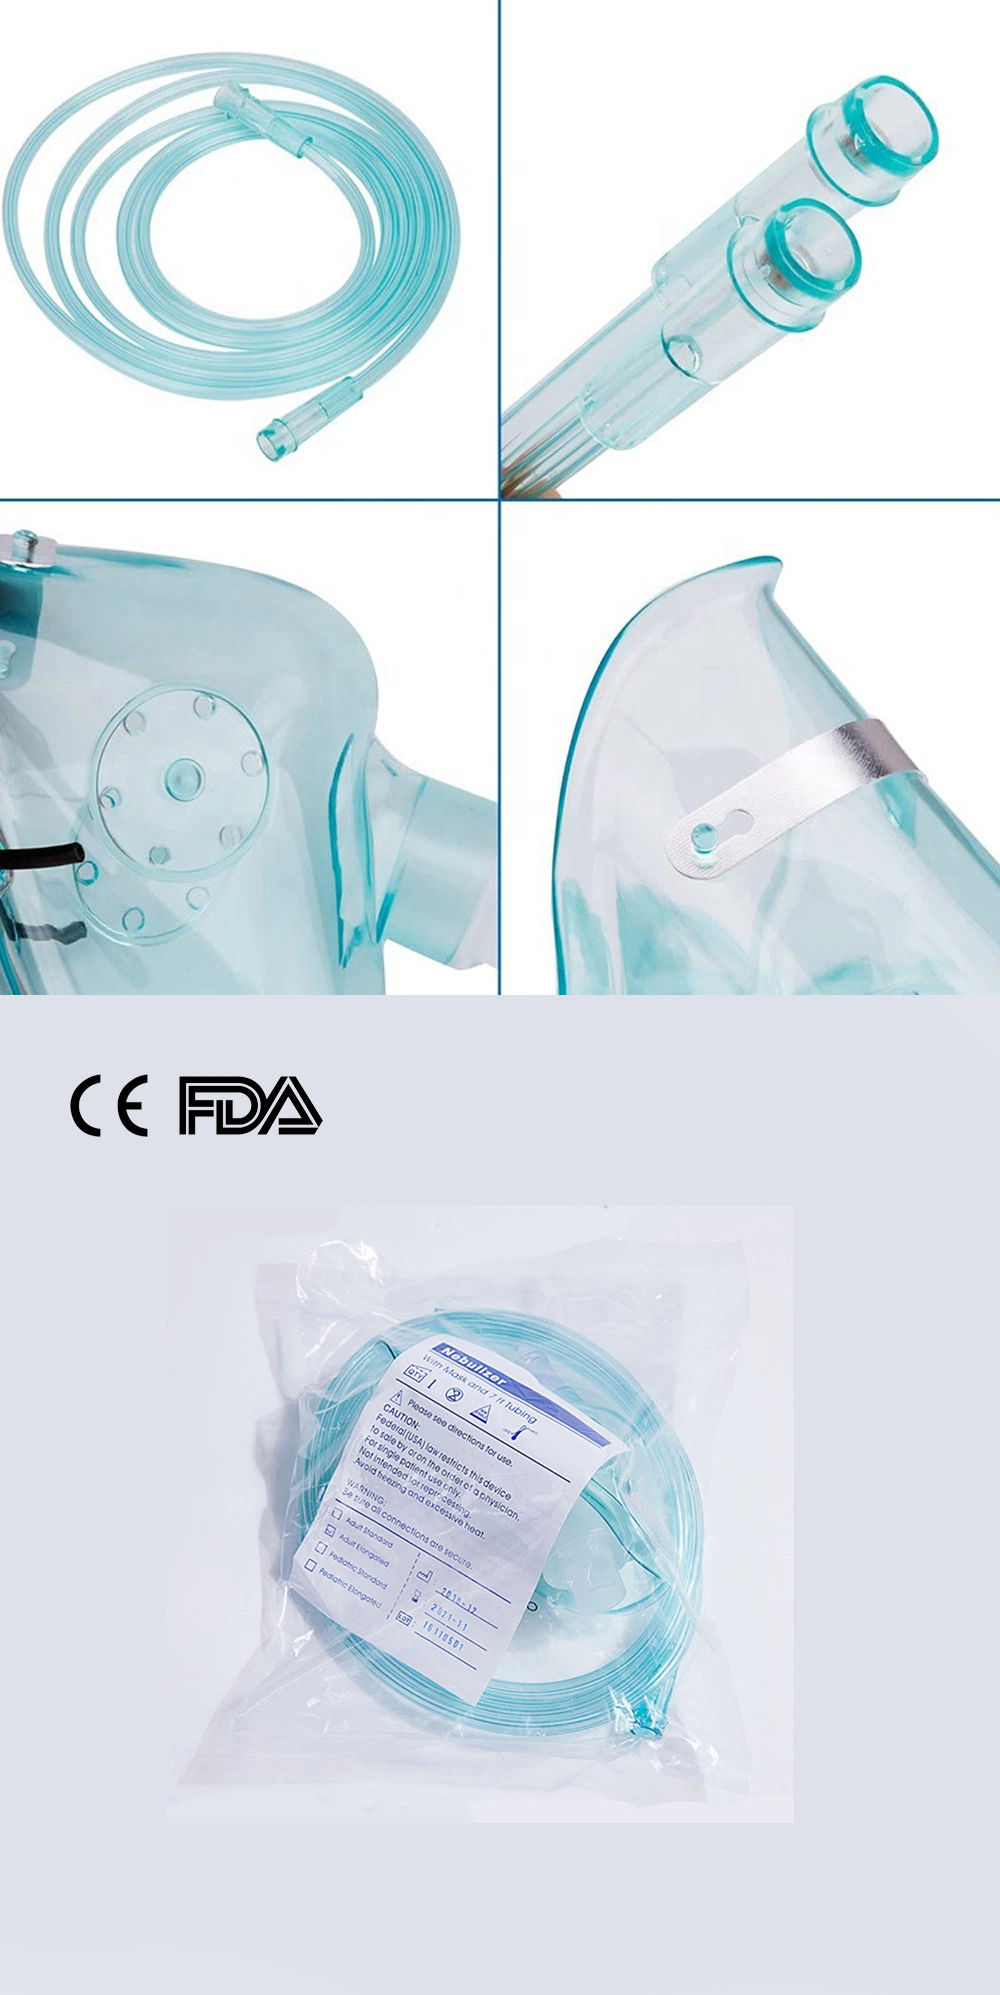 High Quality Medical Portable PVC Nebulizer Mask with Oxygen Tube Size S, M, L, XL with 10cc Nebulizer Cup for Hospital Green